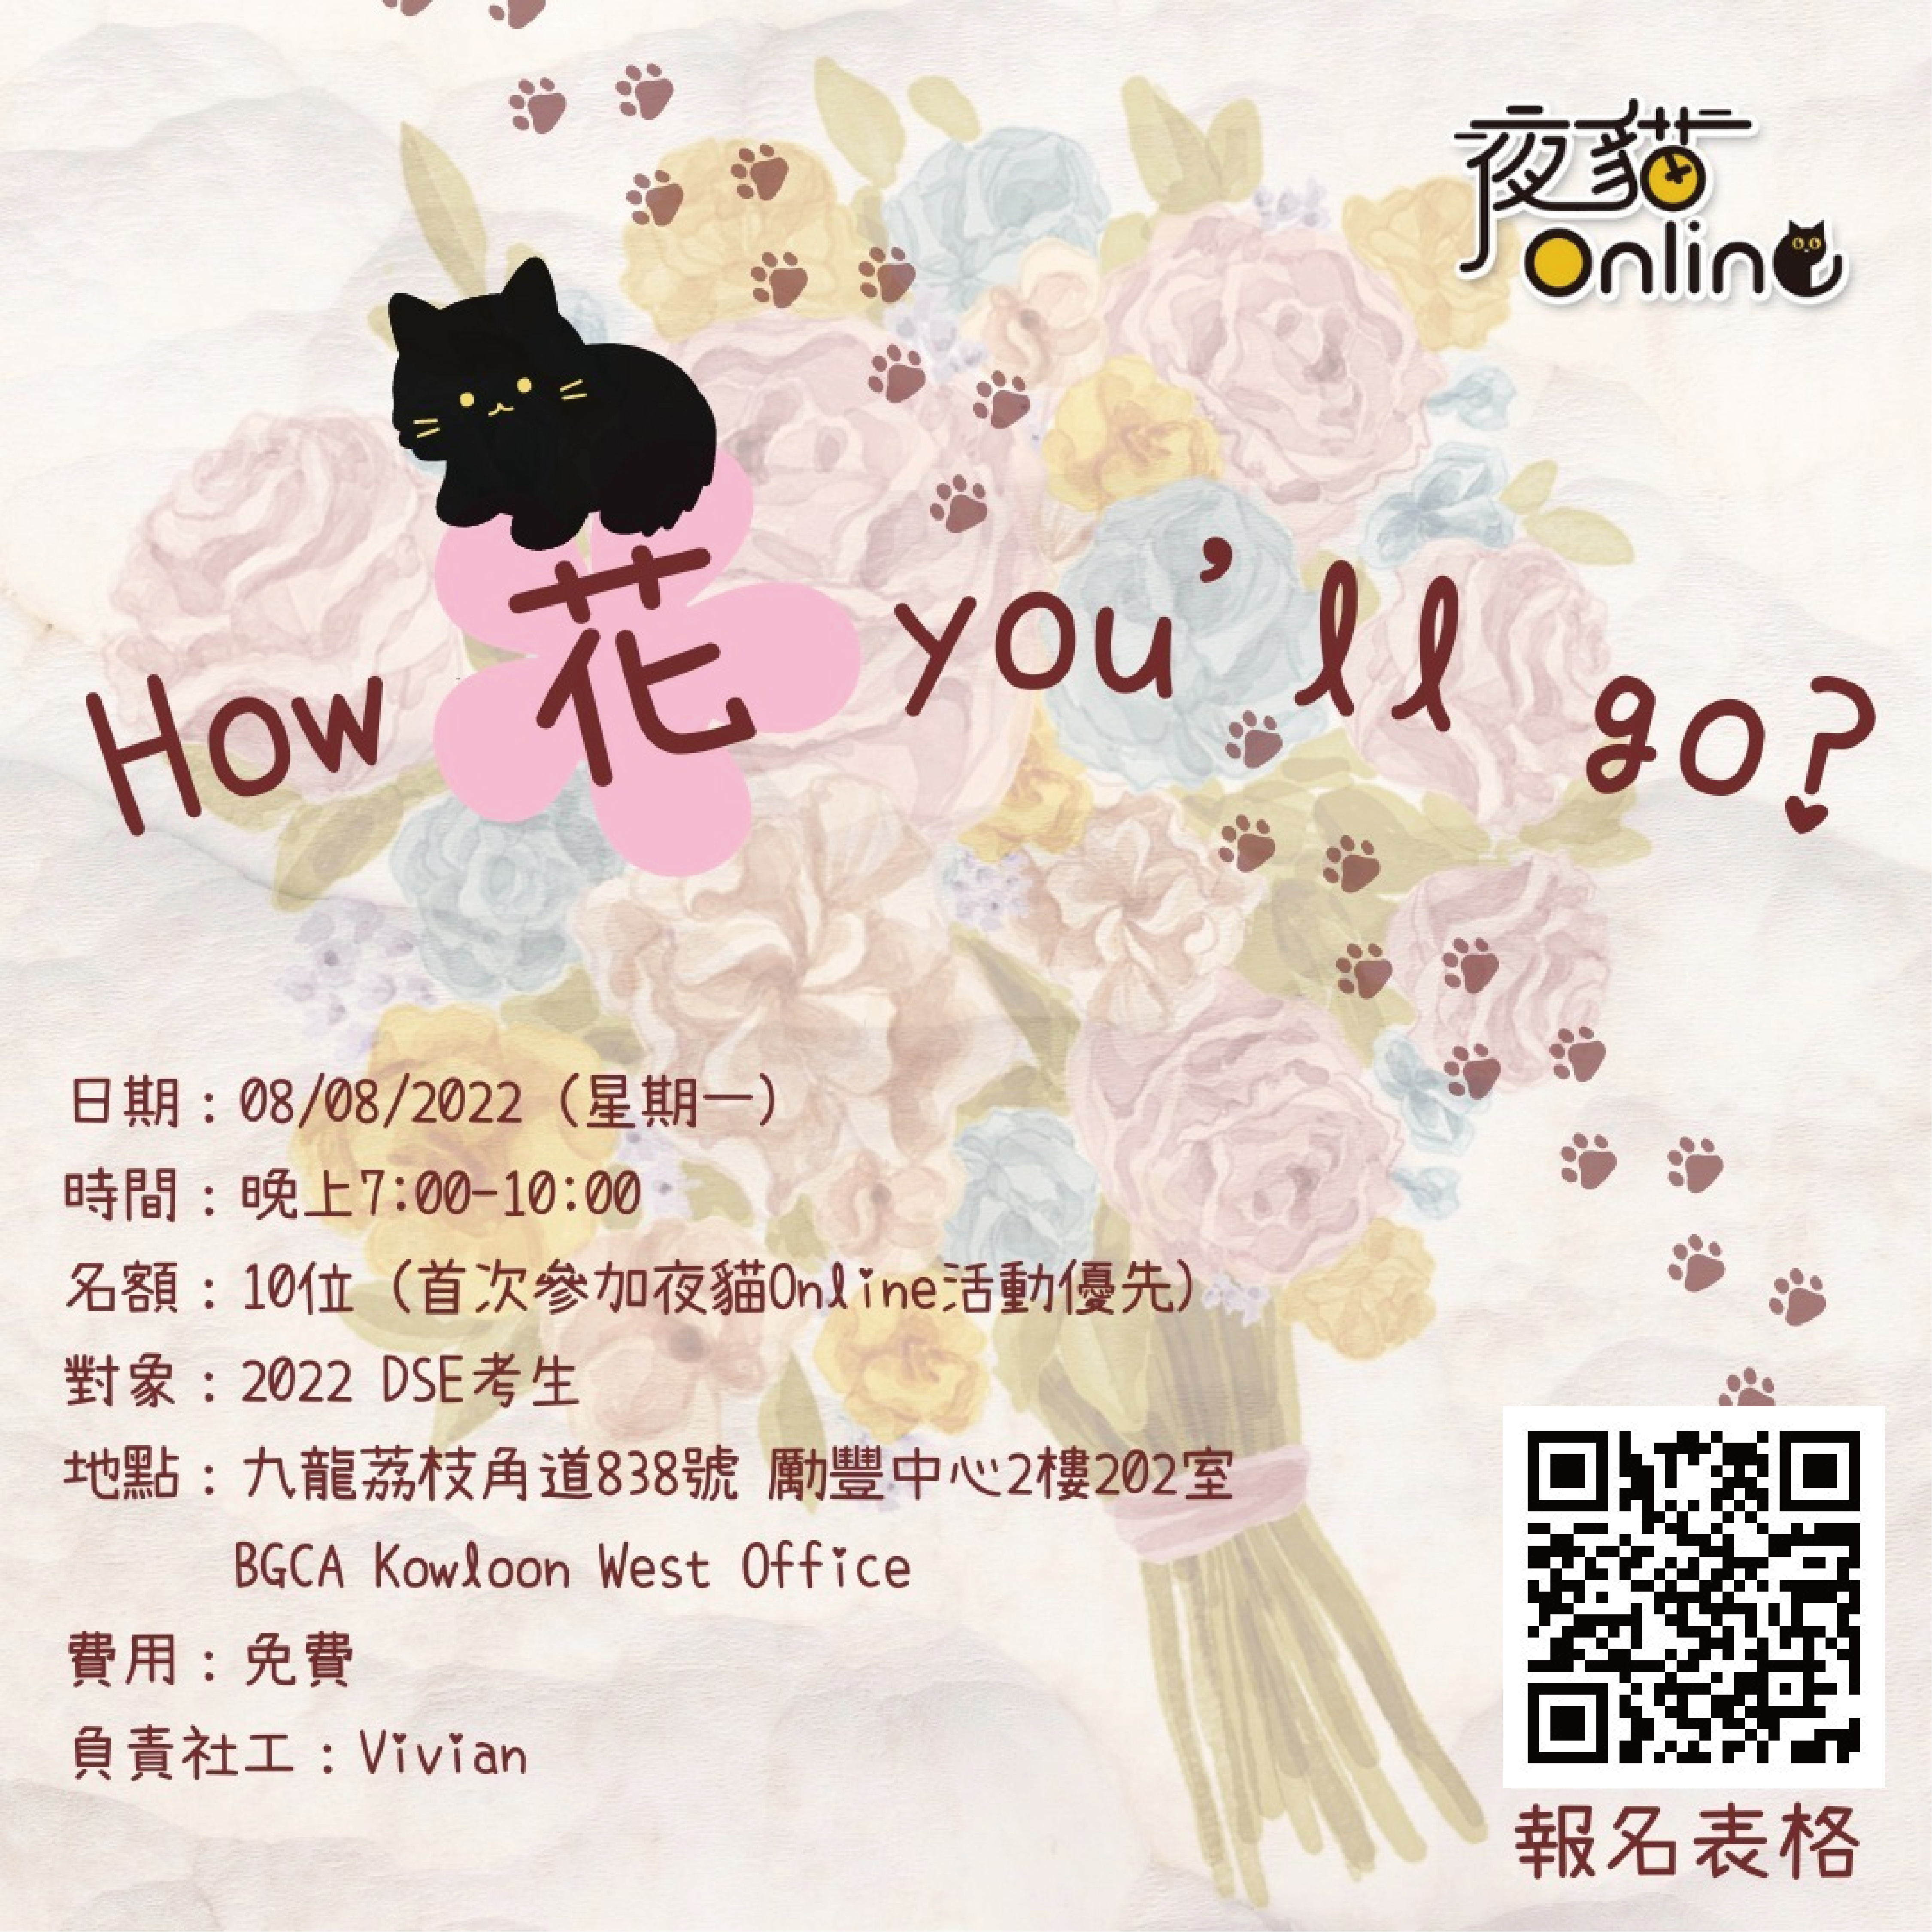 How 花 you'll go?